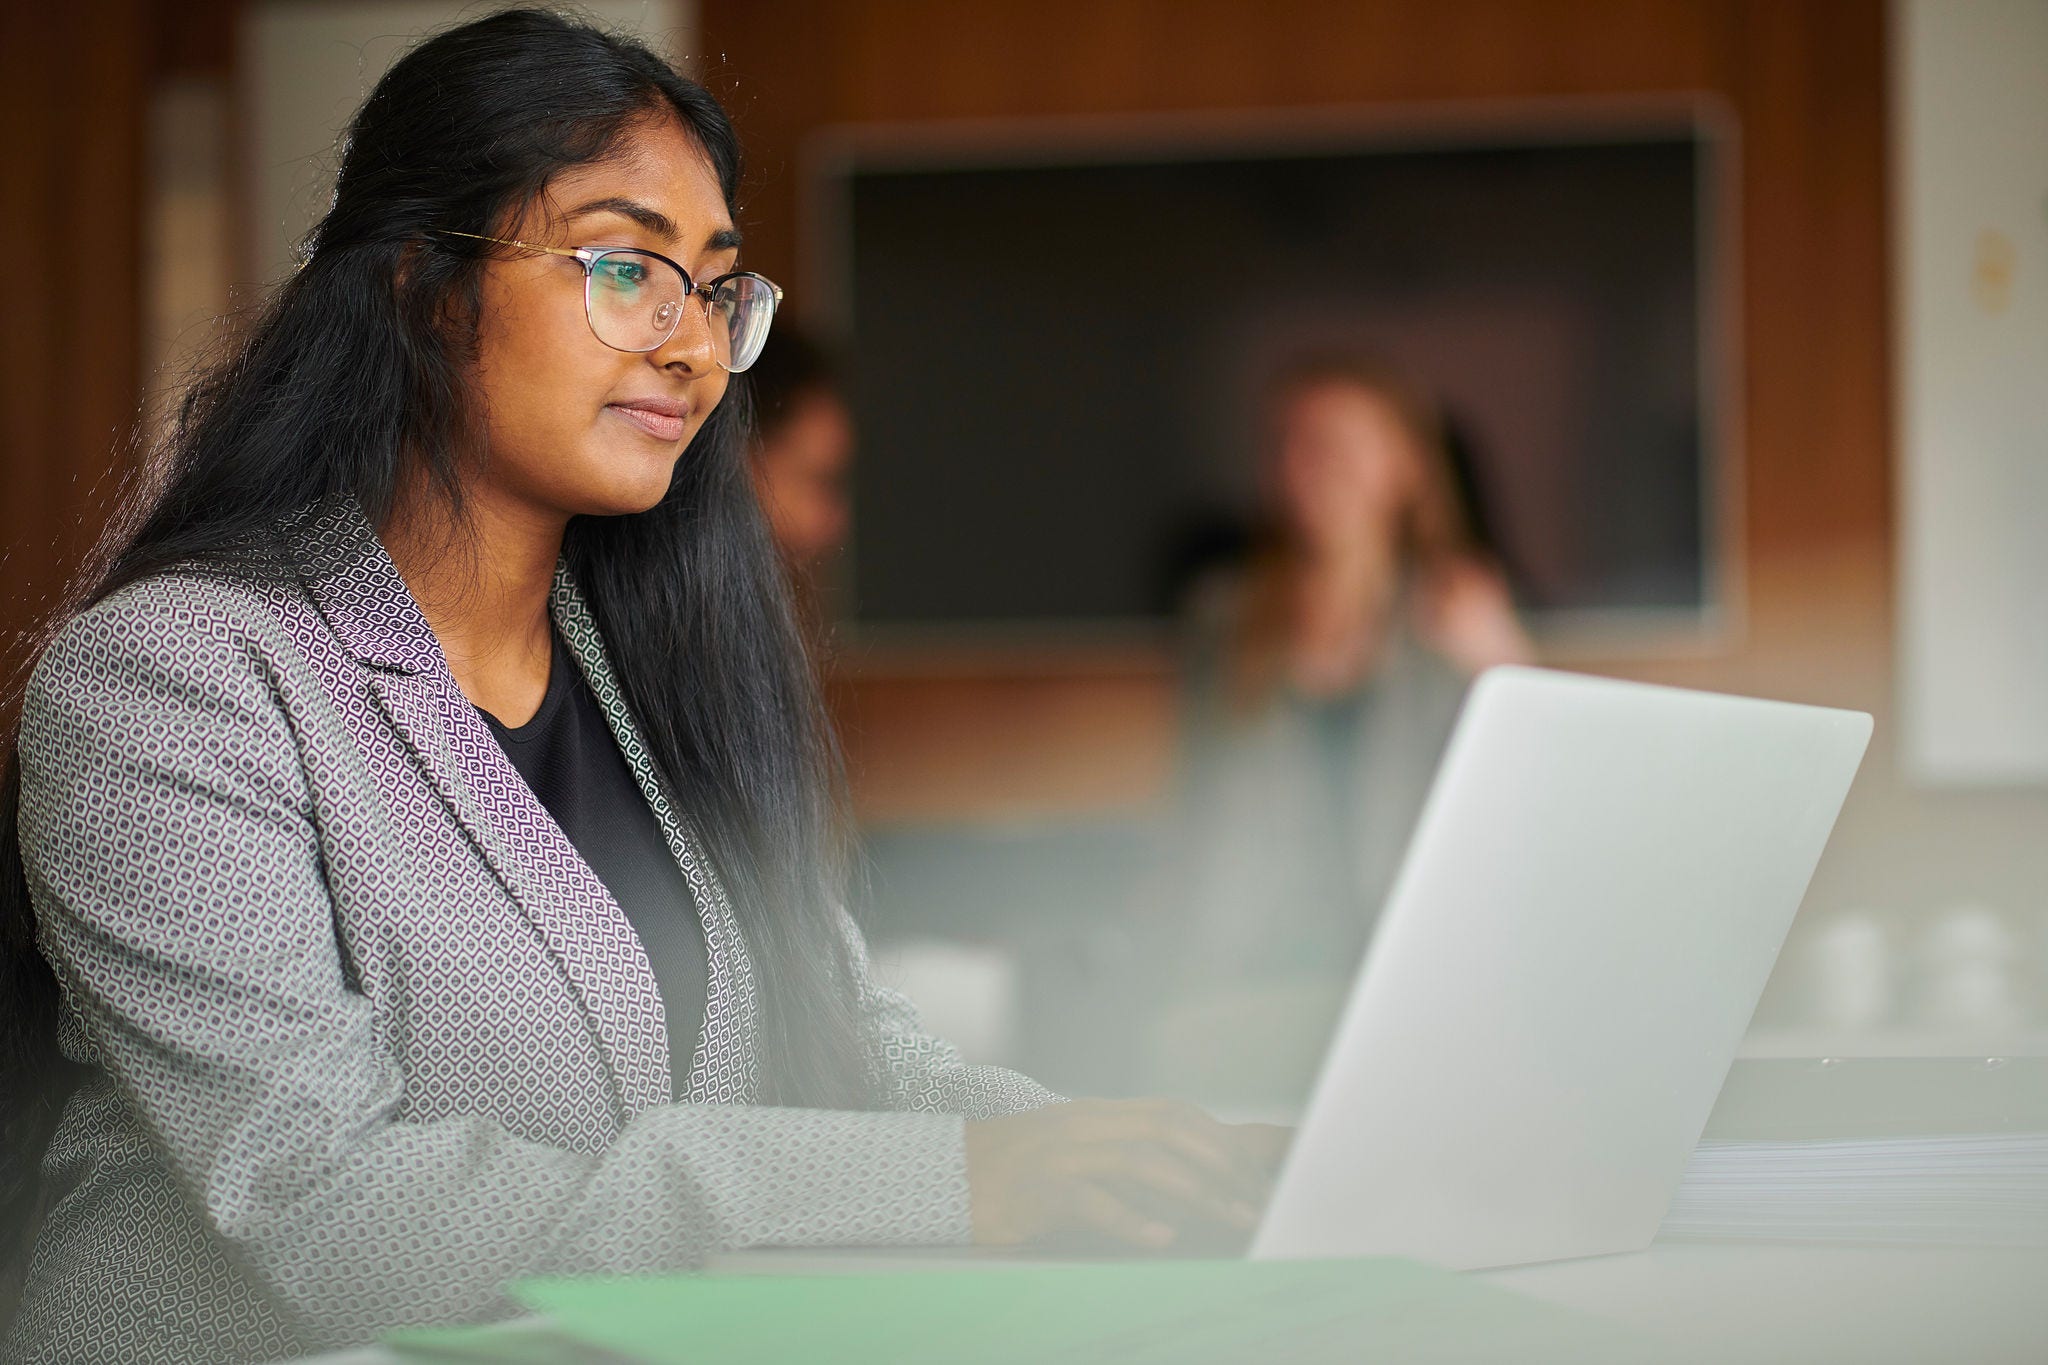 young woman dressed professionally working at a laptop